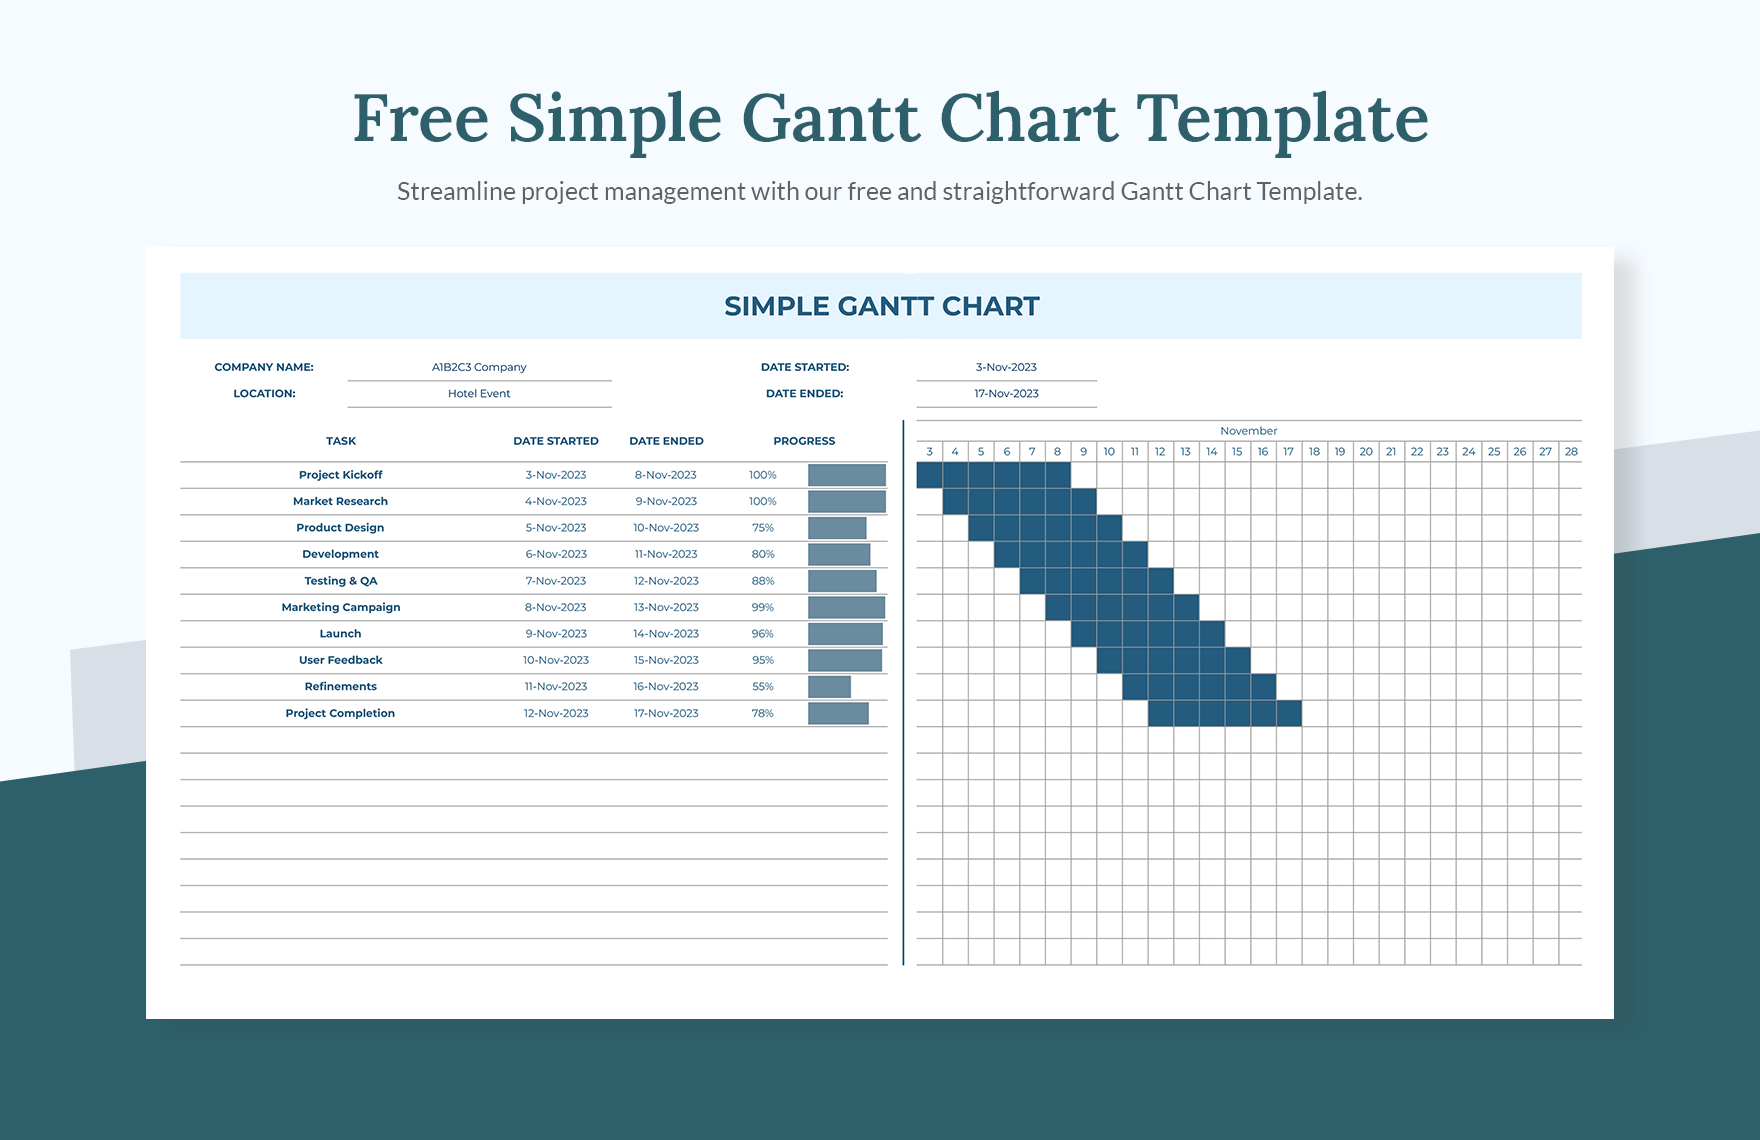 Free Simple Gantt Chart Template - Download in Excel, Google Sheets ...